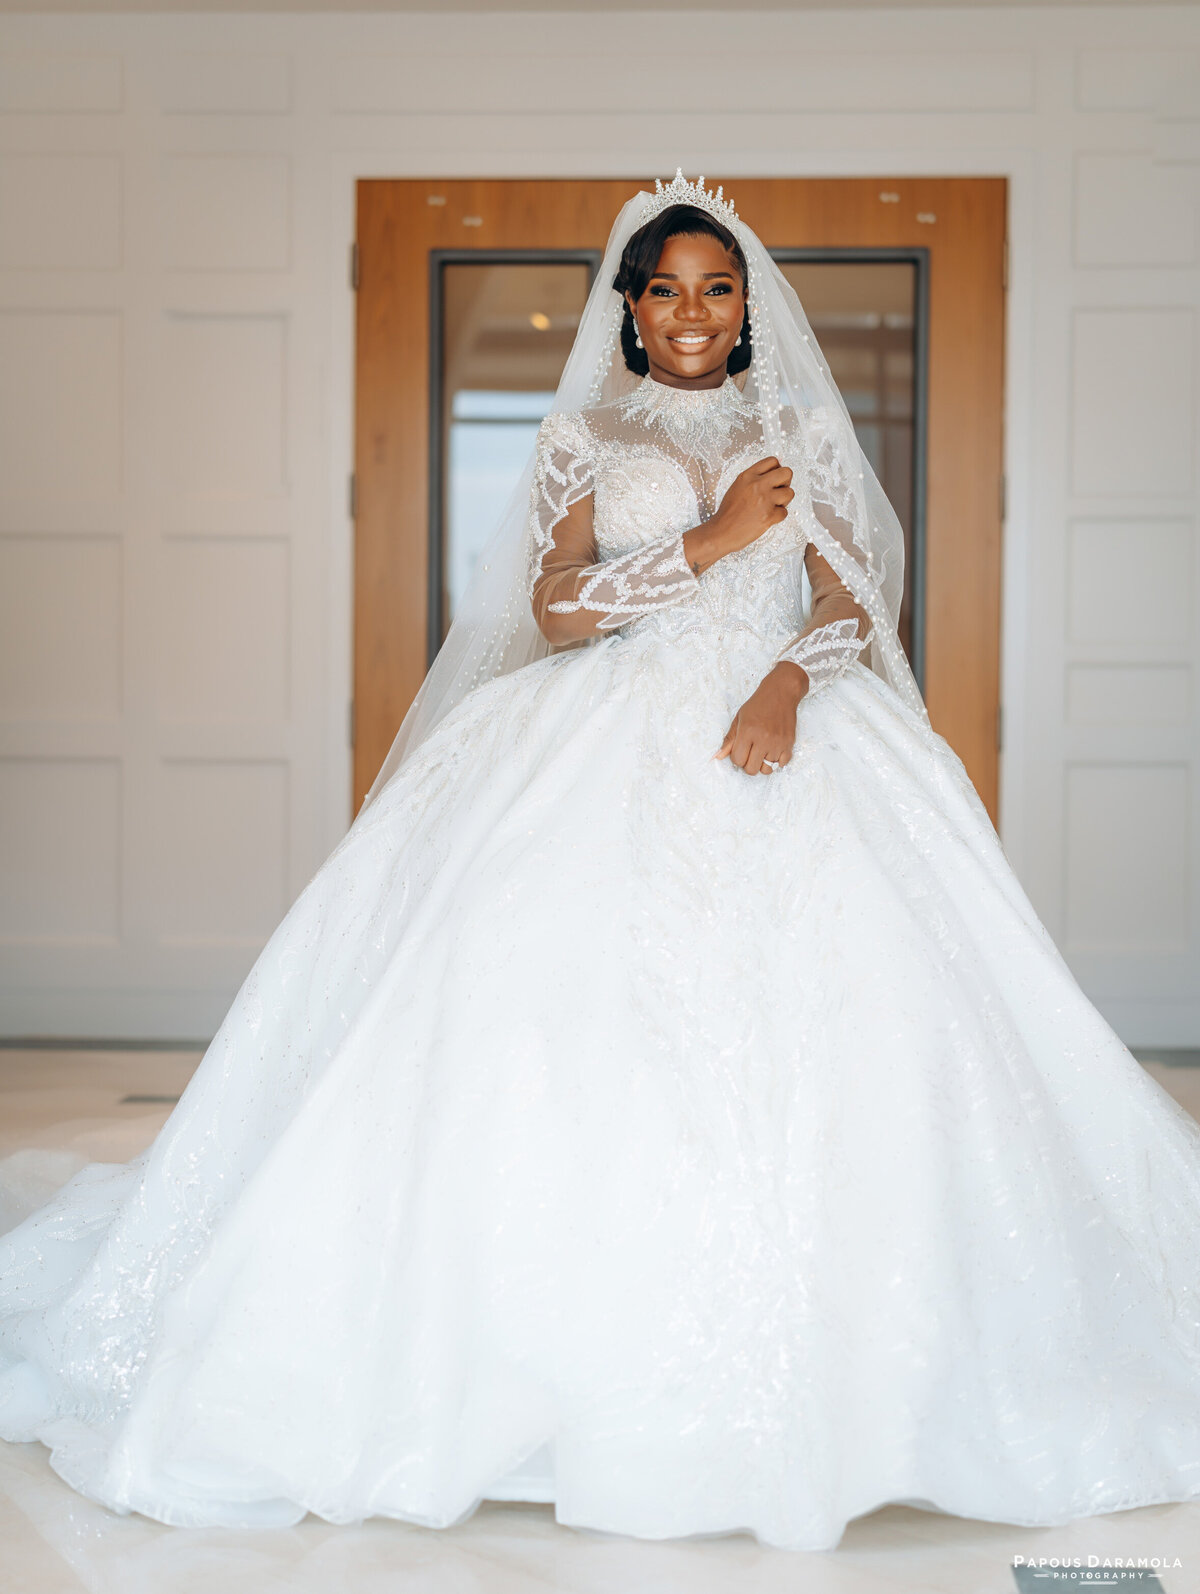 Abigail and Abije Oruka Events Papouse photographer Wedding event planners Toronto planner African Nigerian Eyitayo Dada Dara Ayoola outdoor ceremony floral princess ballgown rolls royce groom suit potraits  paradise banquet hall vaughn 101